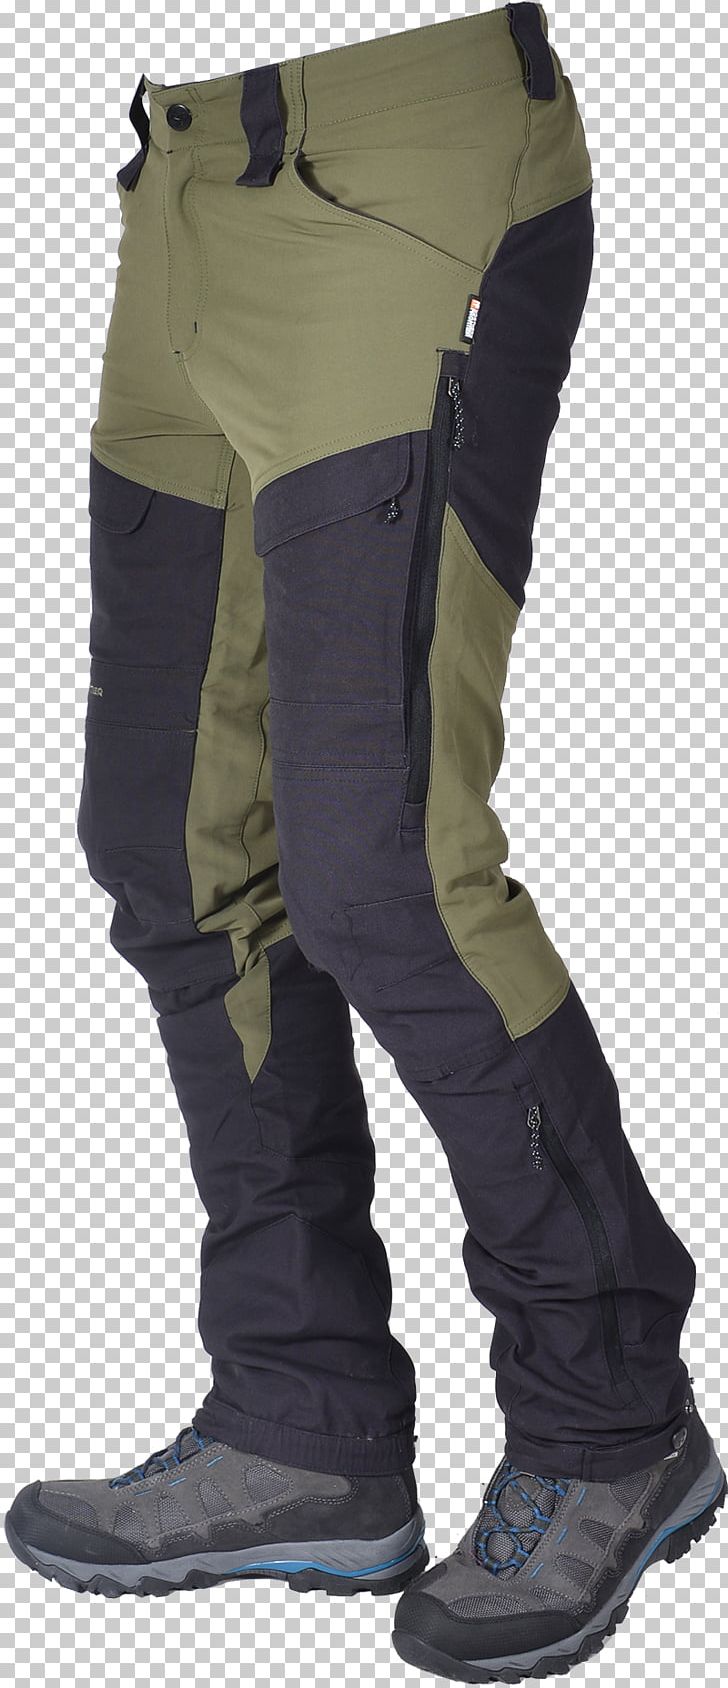 Cargo Pants Khaki Jeans PNG, Clipart, Cargo, Cargo Pants, Green Olive, Jeans, Khaki Free PNG Download